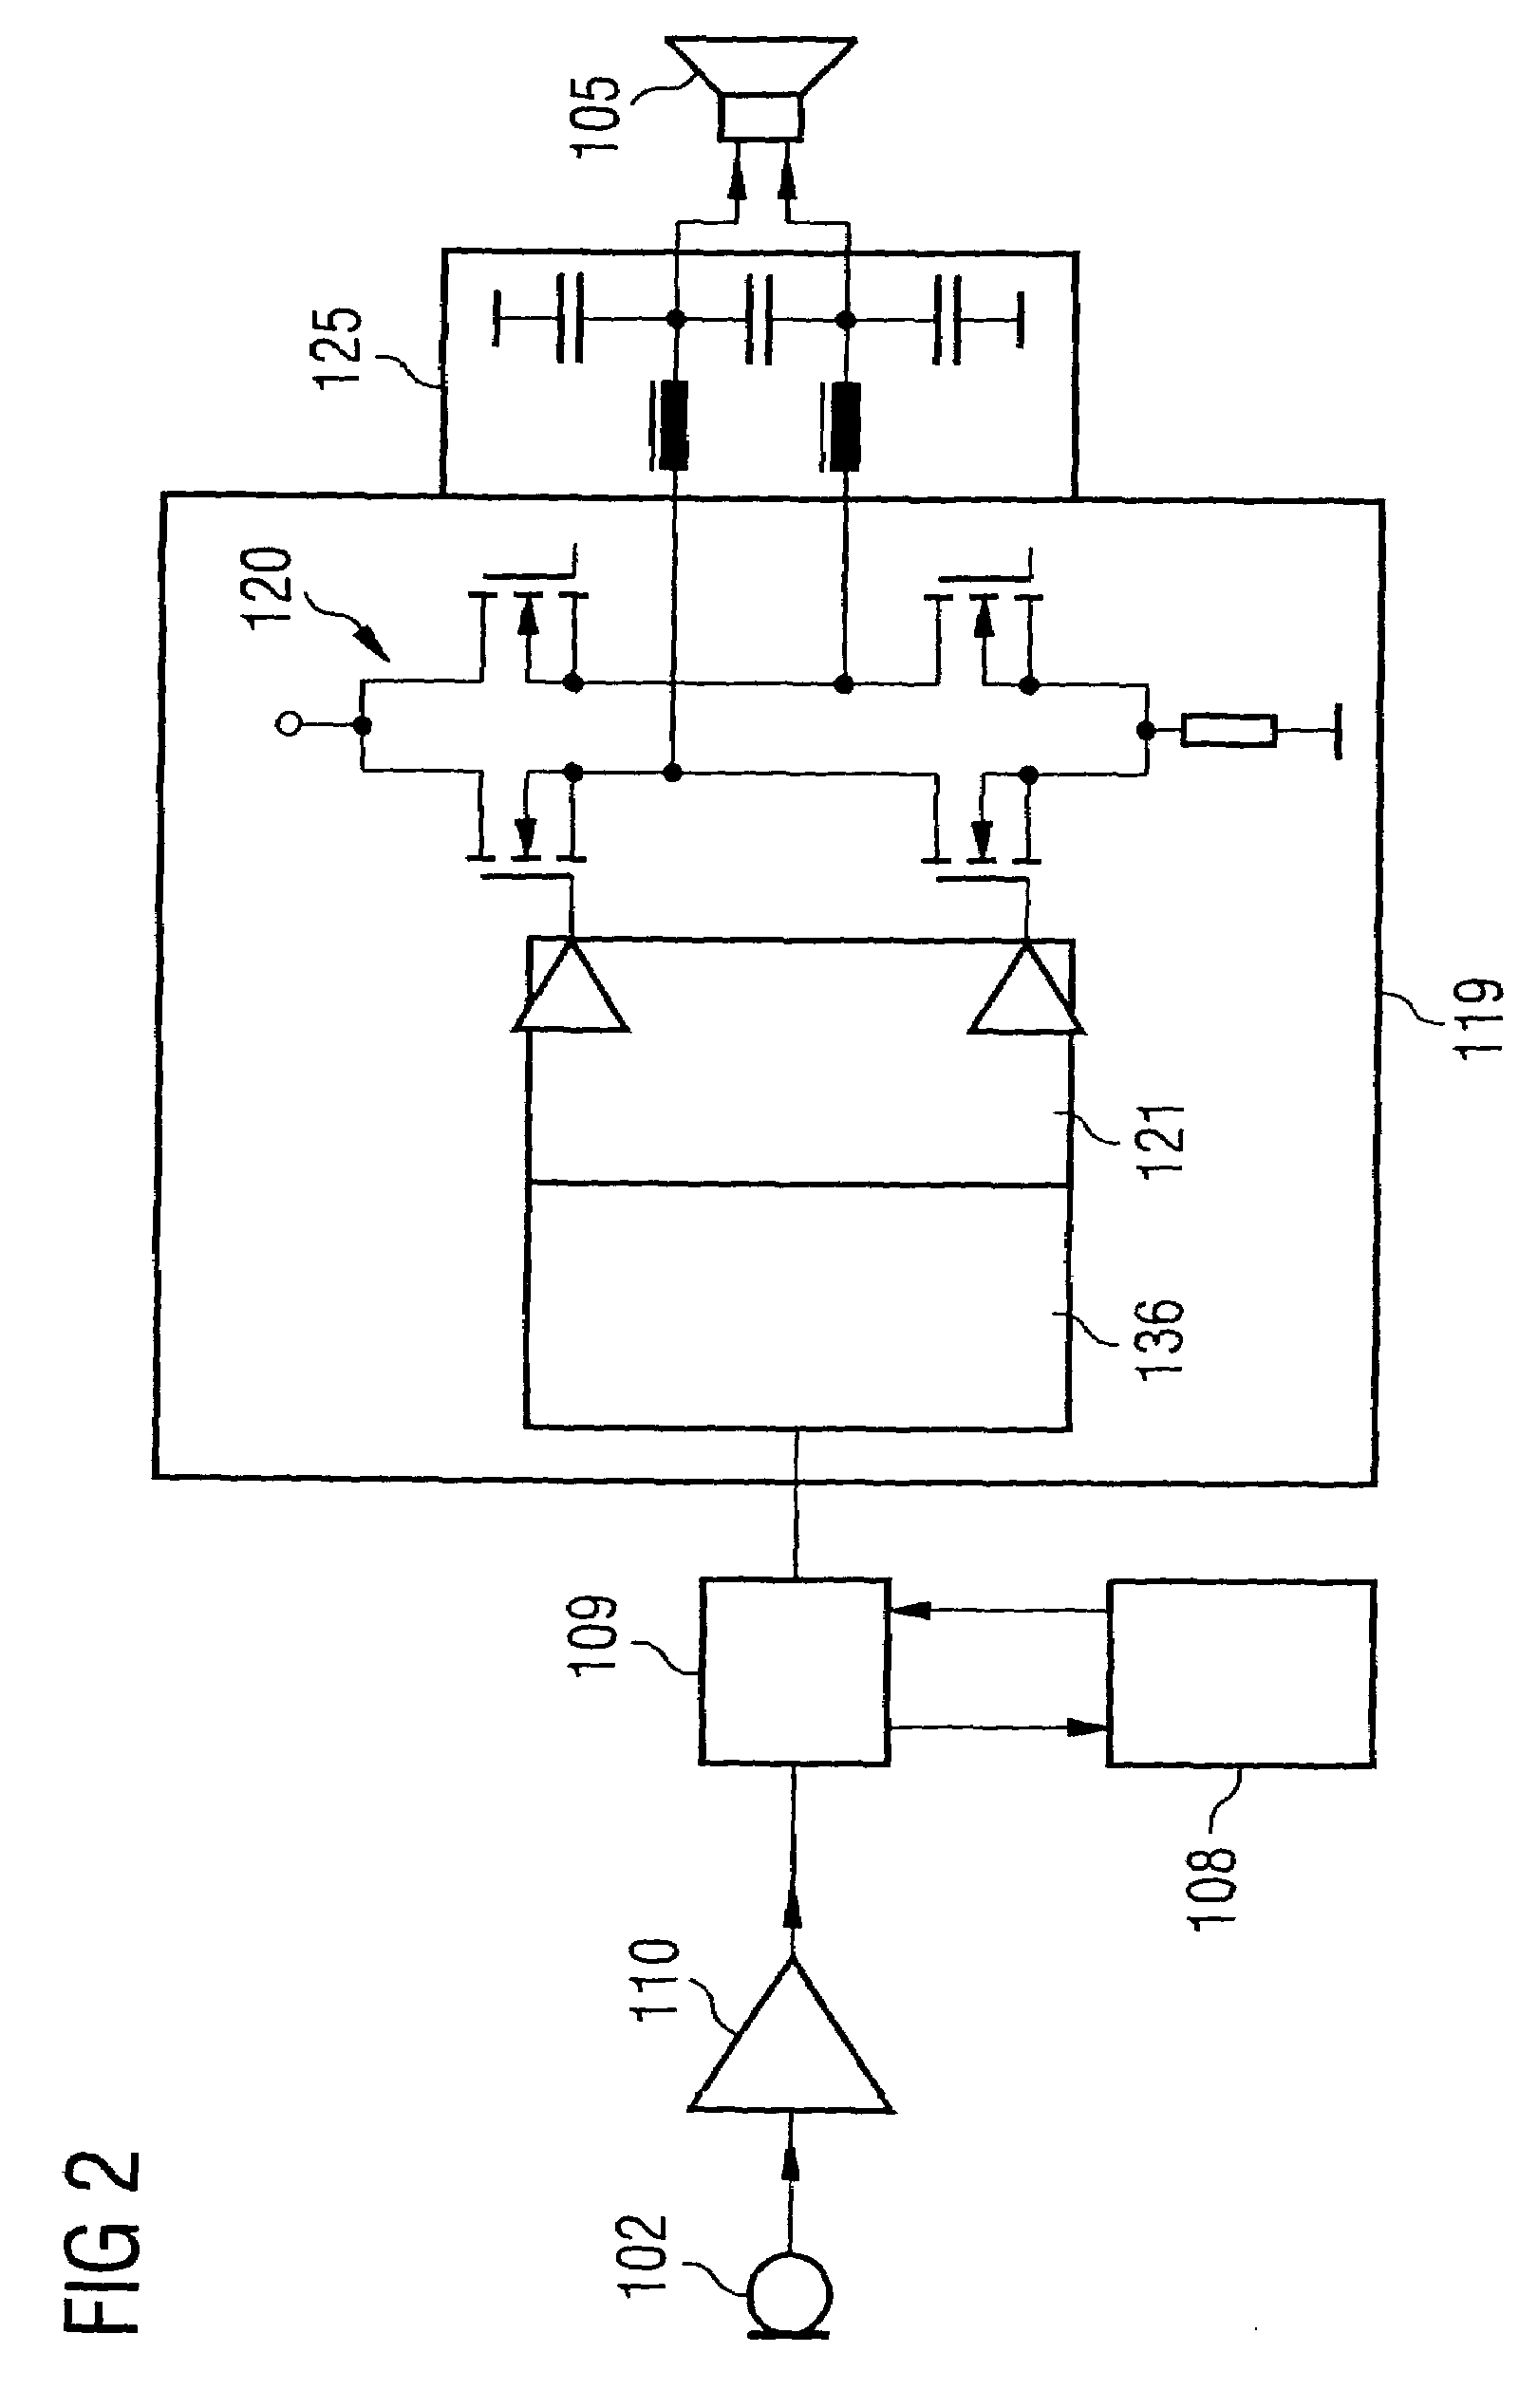 Drive circuit, device, and method for suppressing noise, and use